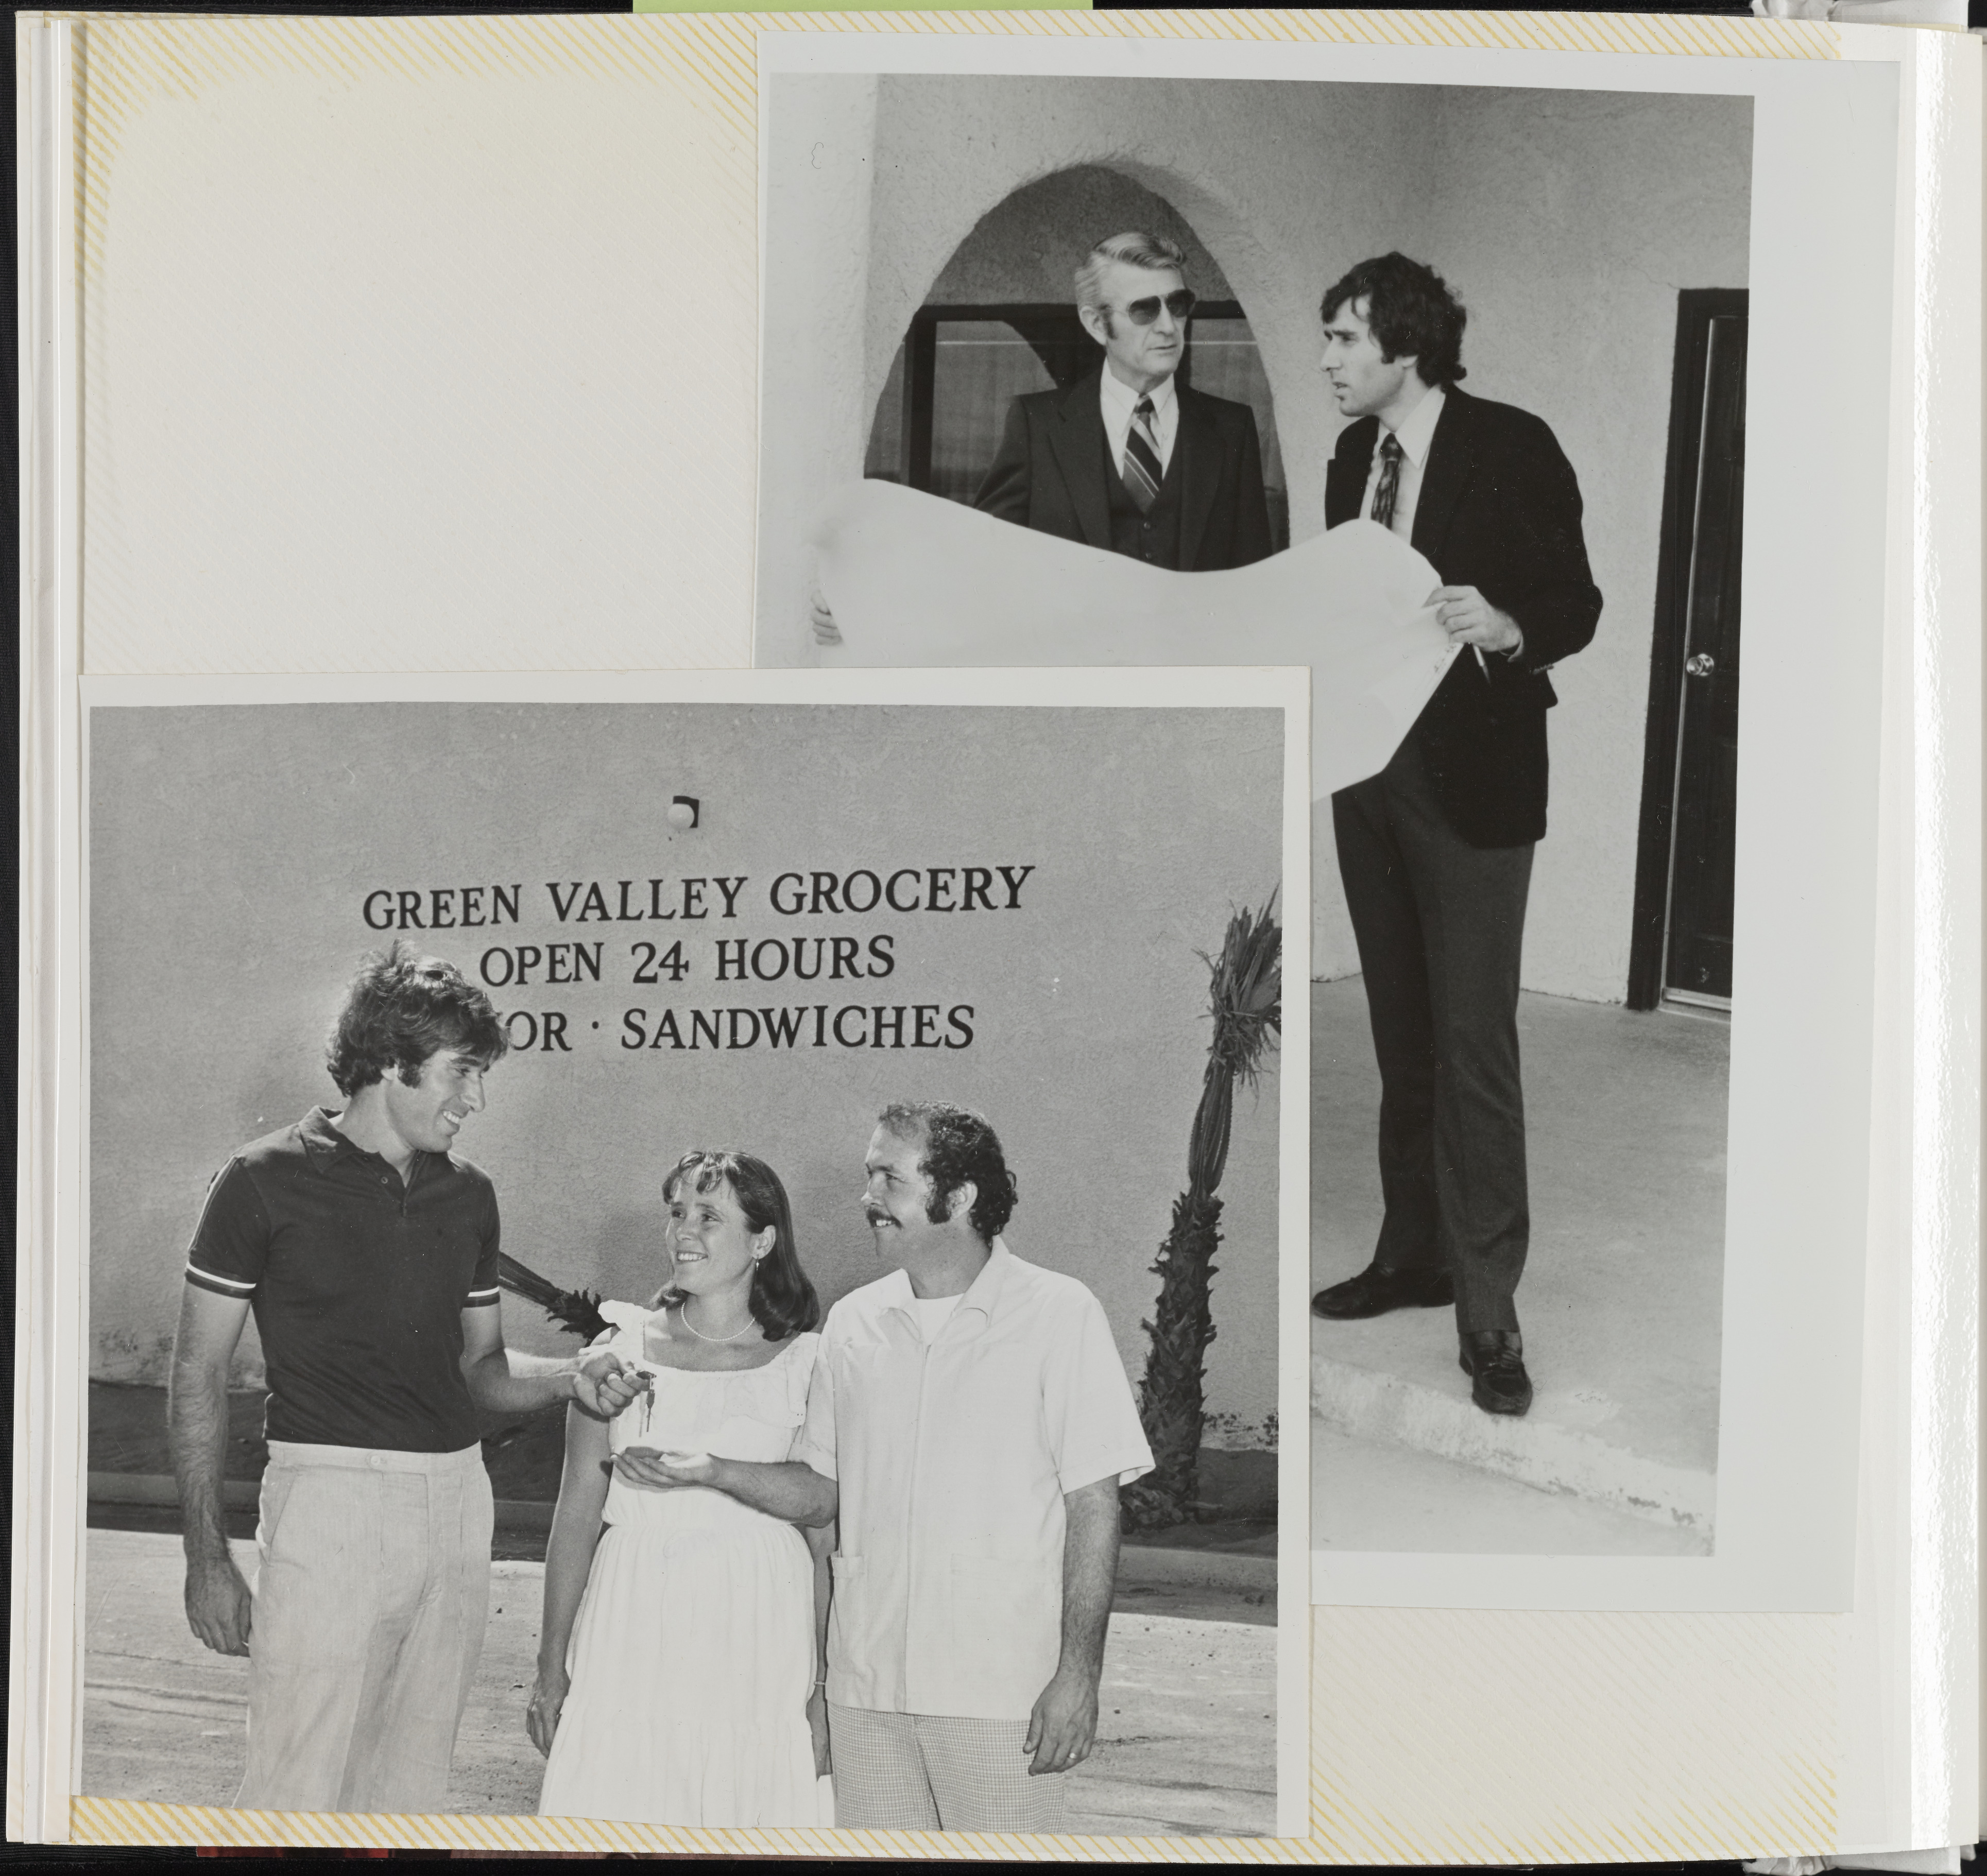 Photograph of Mark Fine with blueprints, and Mark Fine delivering keys outside of Green Valley Grocery